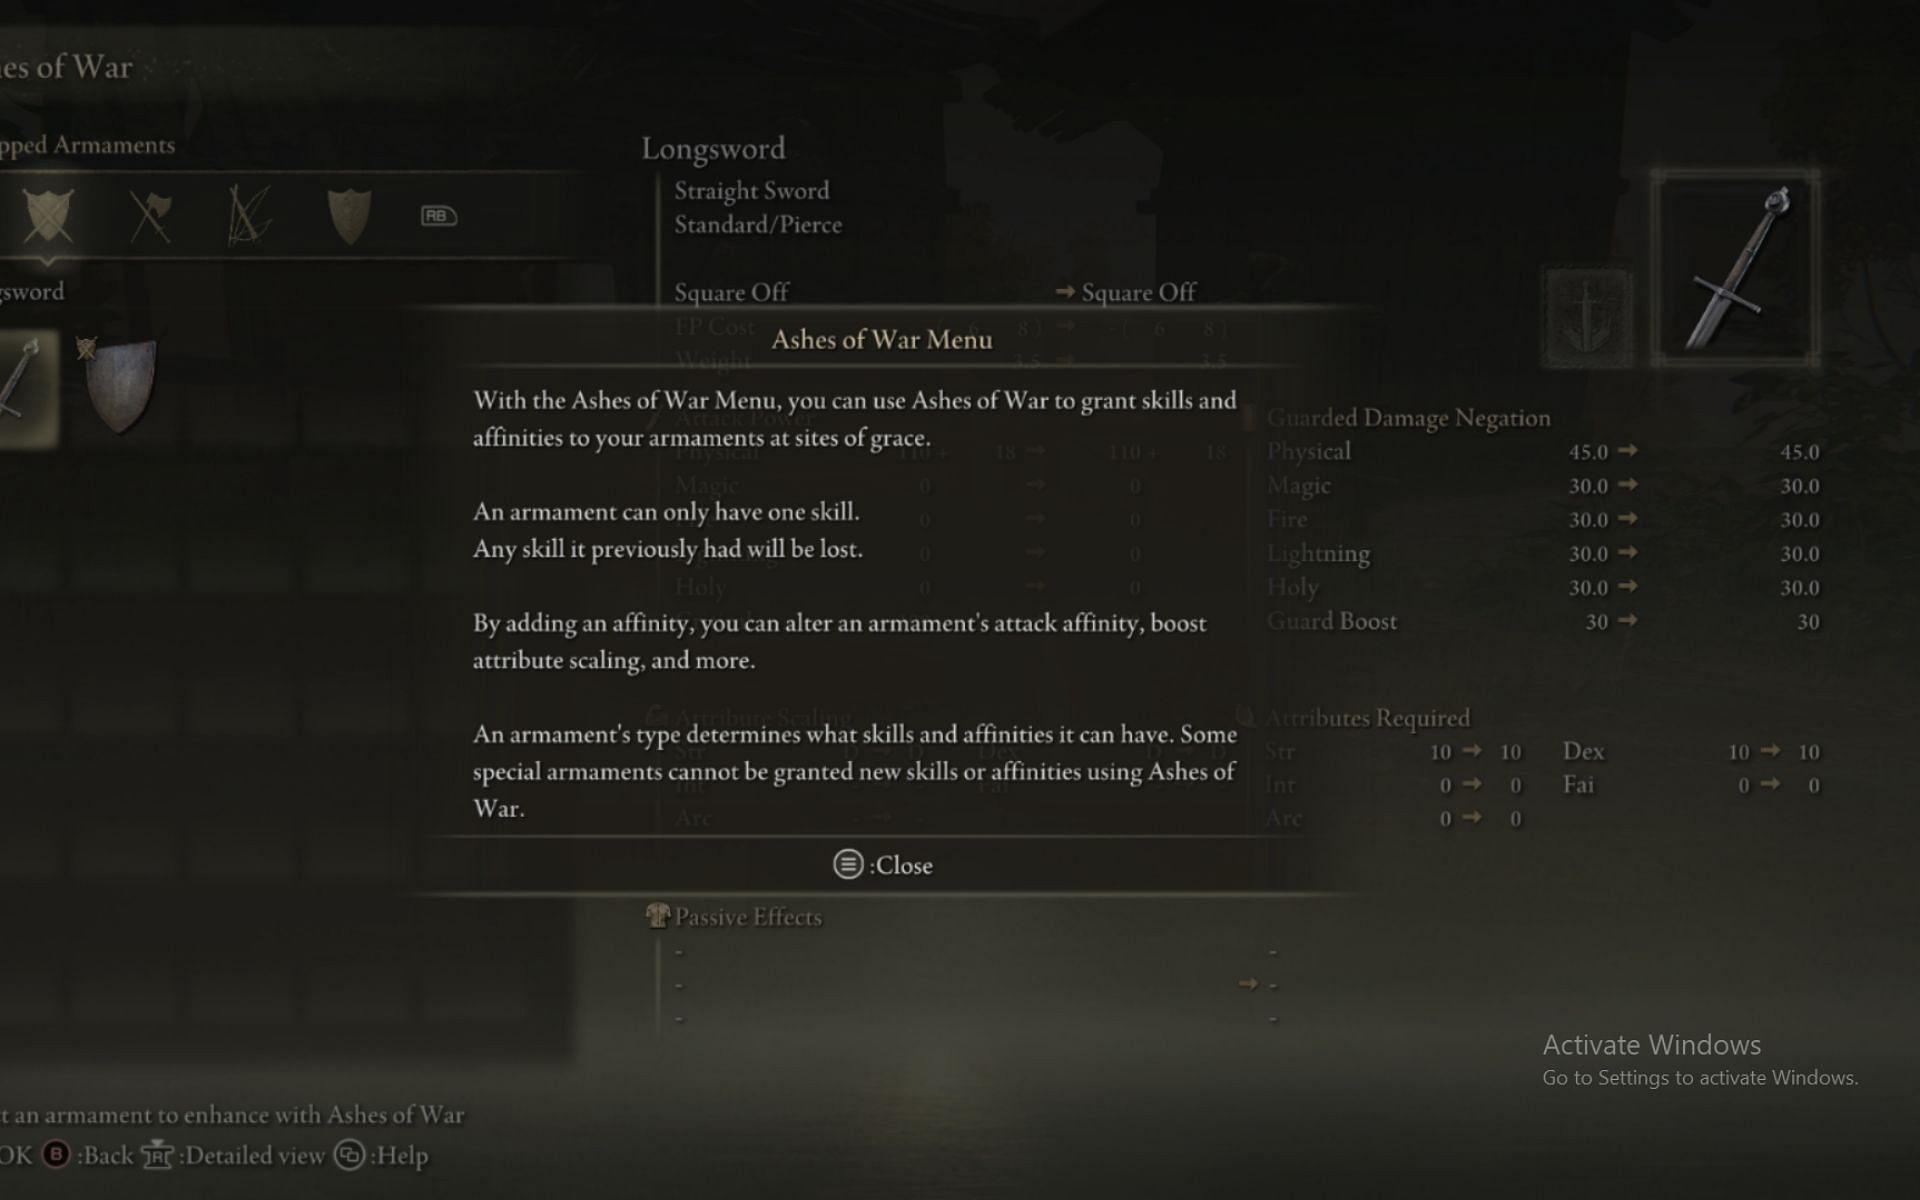 Players can use skills to customize weapons. (Image via FromSoftware)